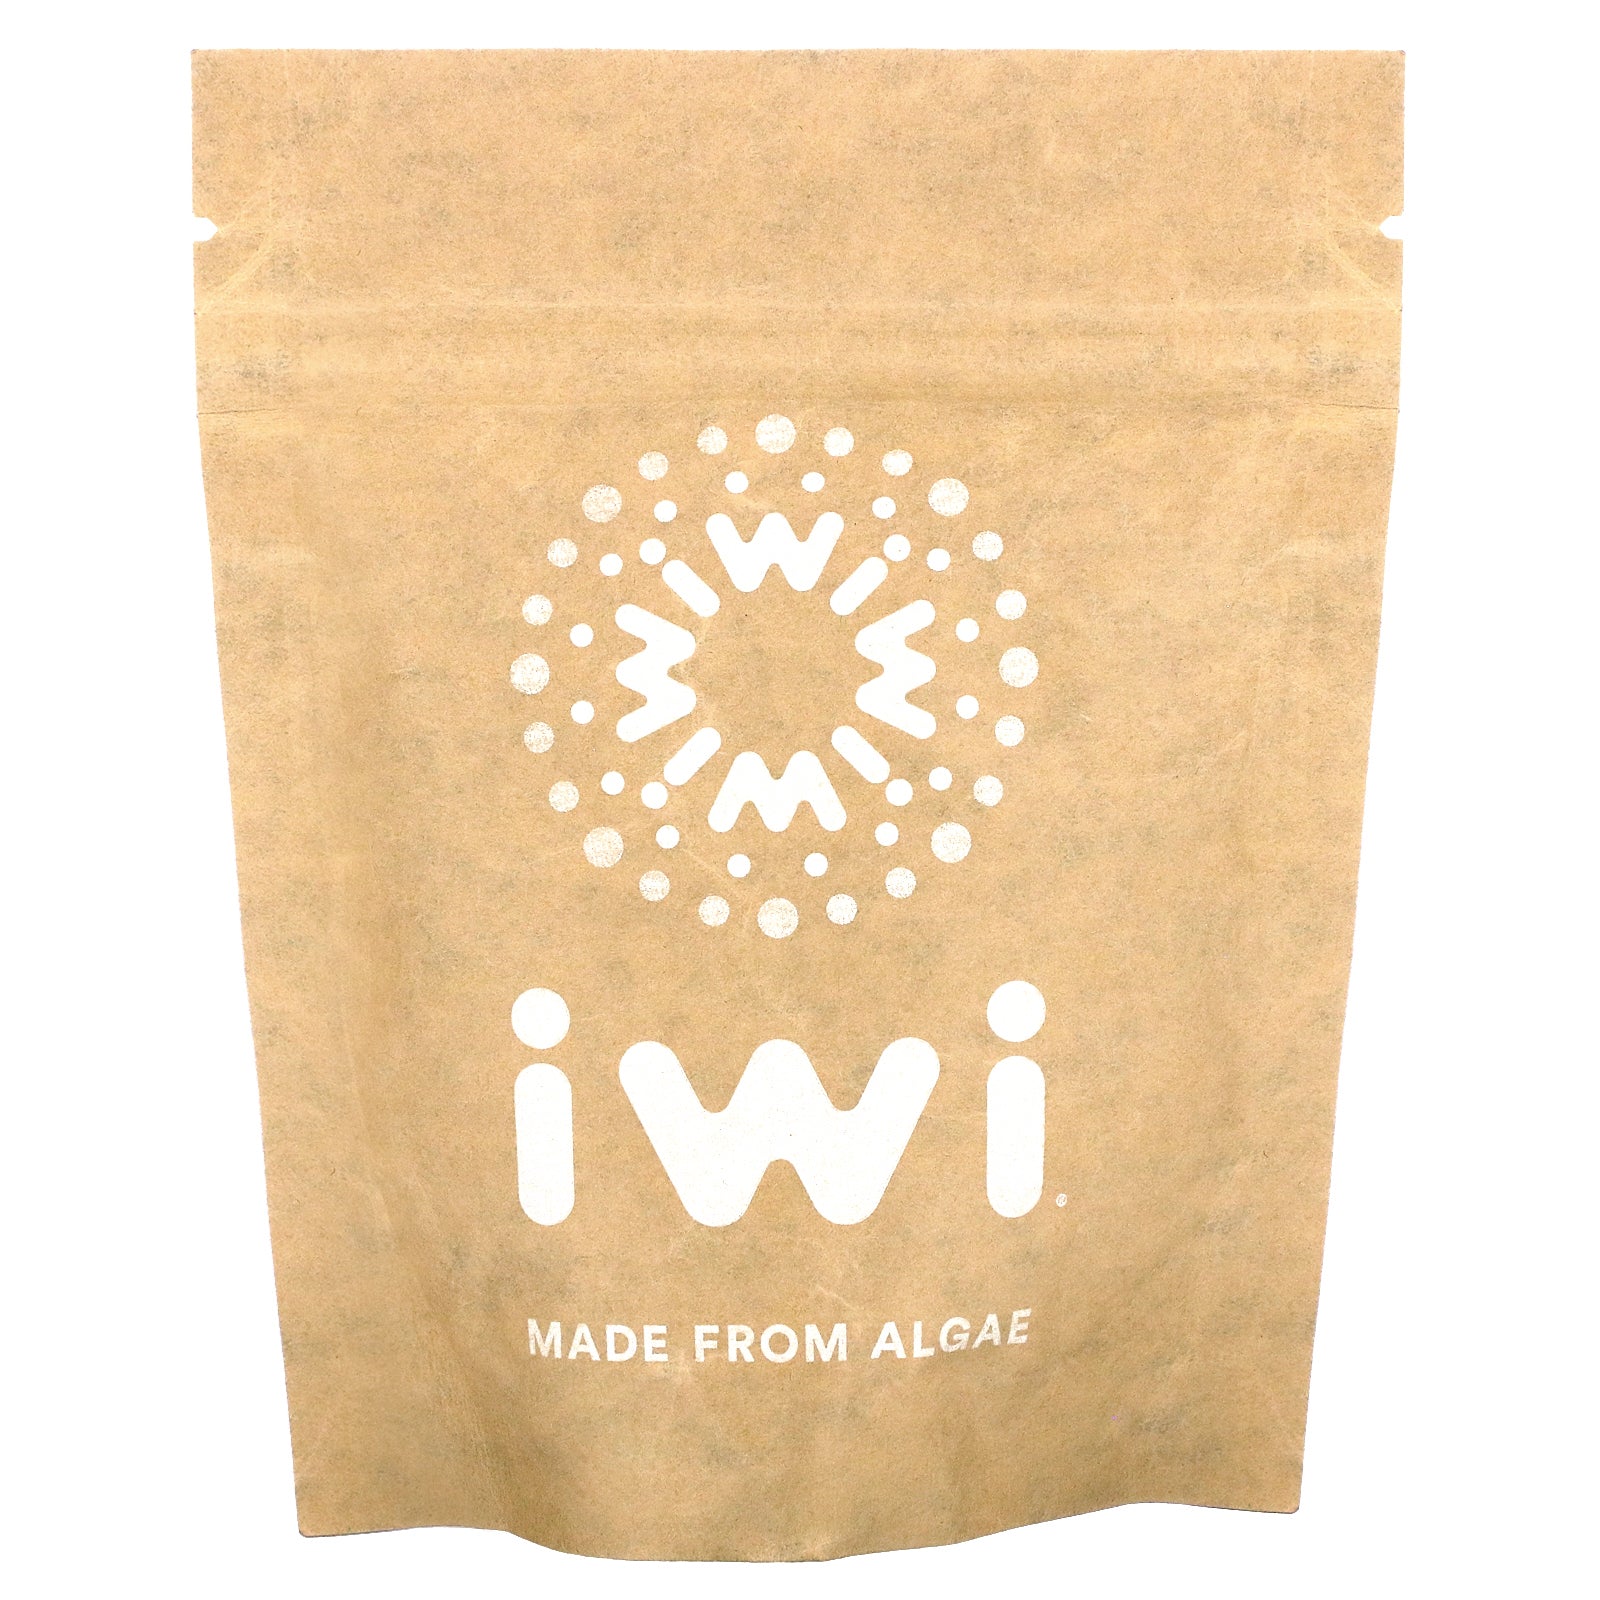 iWi, Omega-3 Refill Pouch, DHA, Softgels